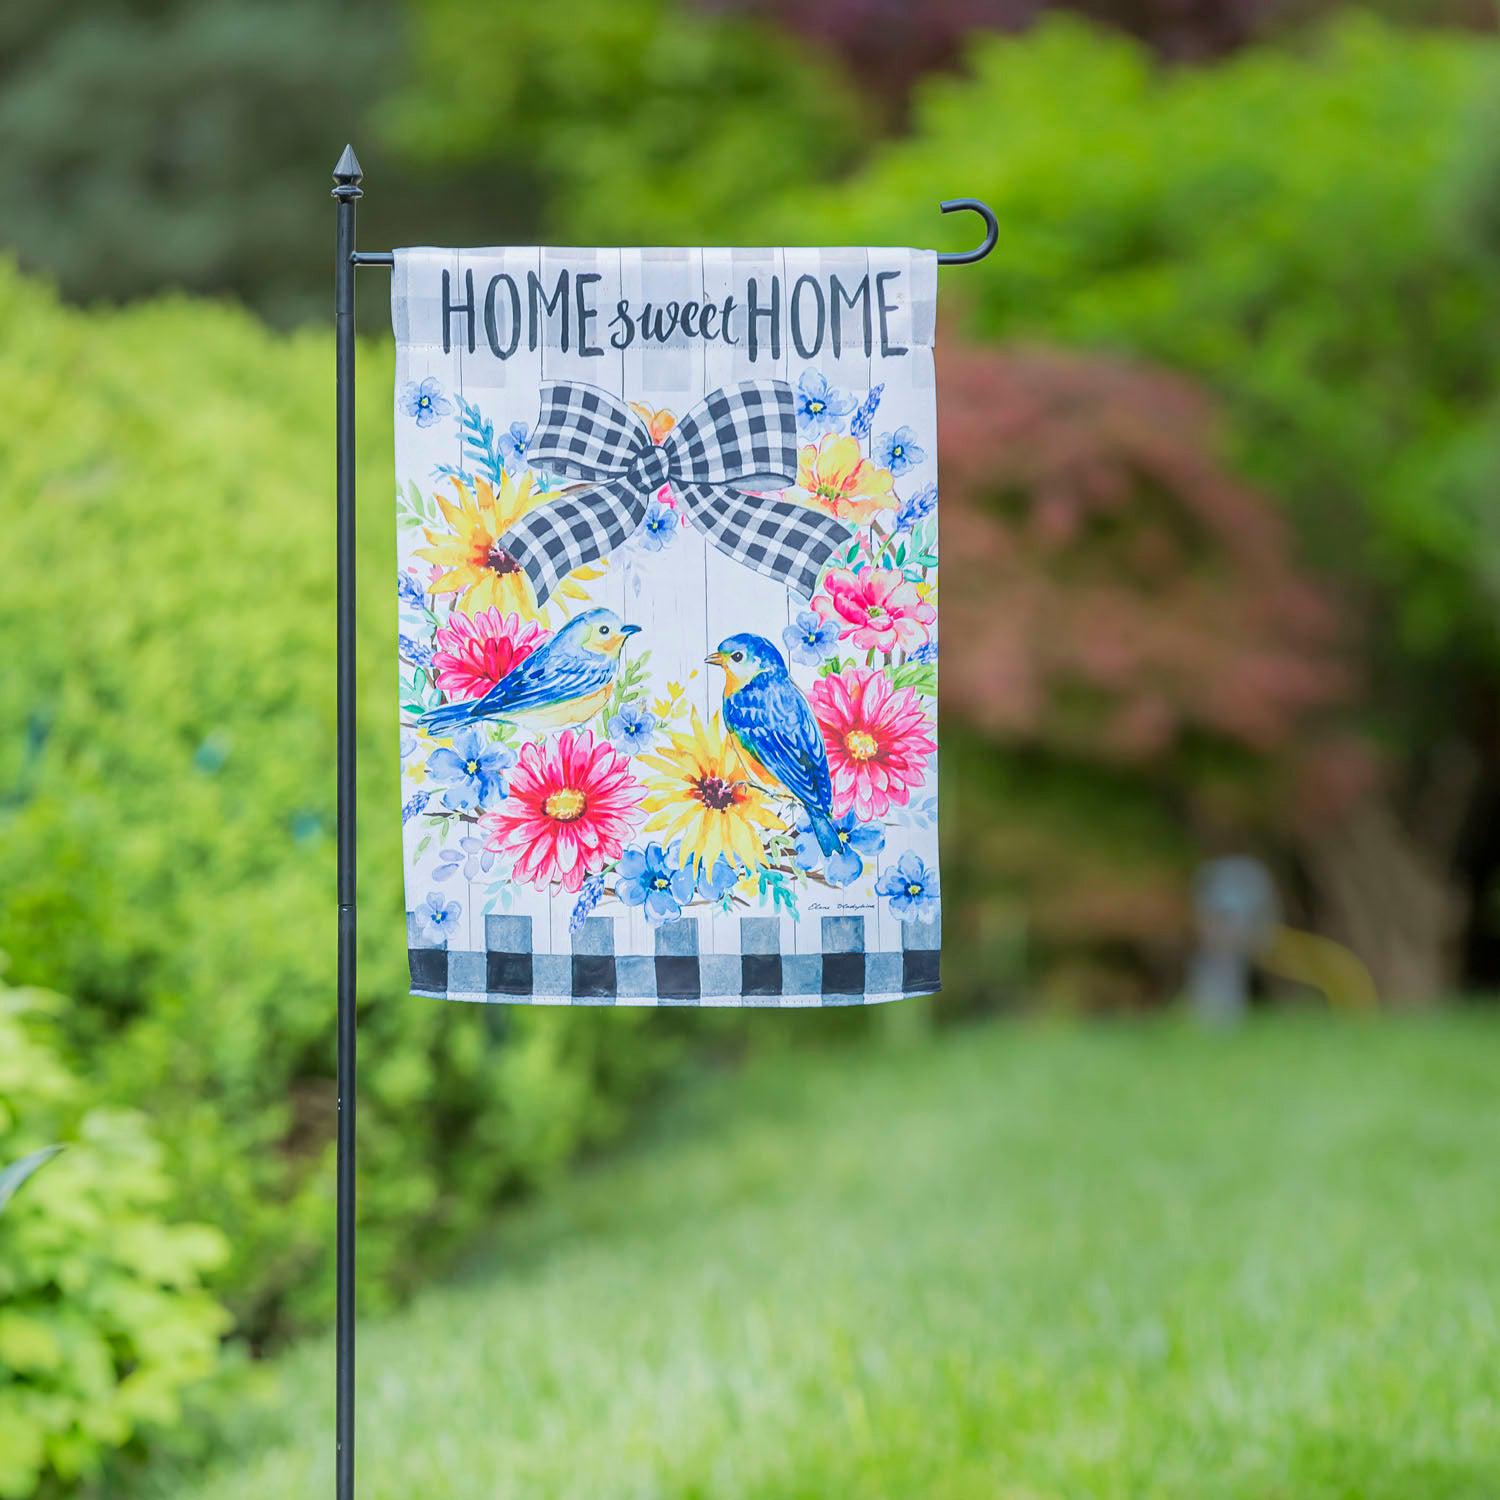 The Spring Bird Wreath garden flag features a spring floral wreath with a pair of bluebirds, black checked accents, and the words "Home Sweet Home".